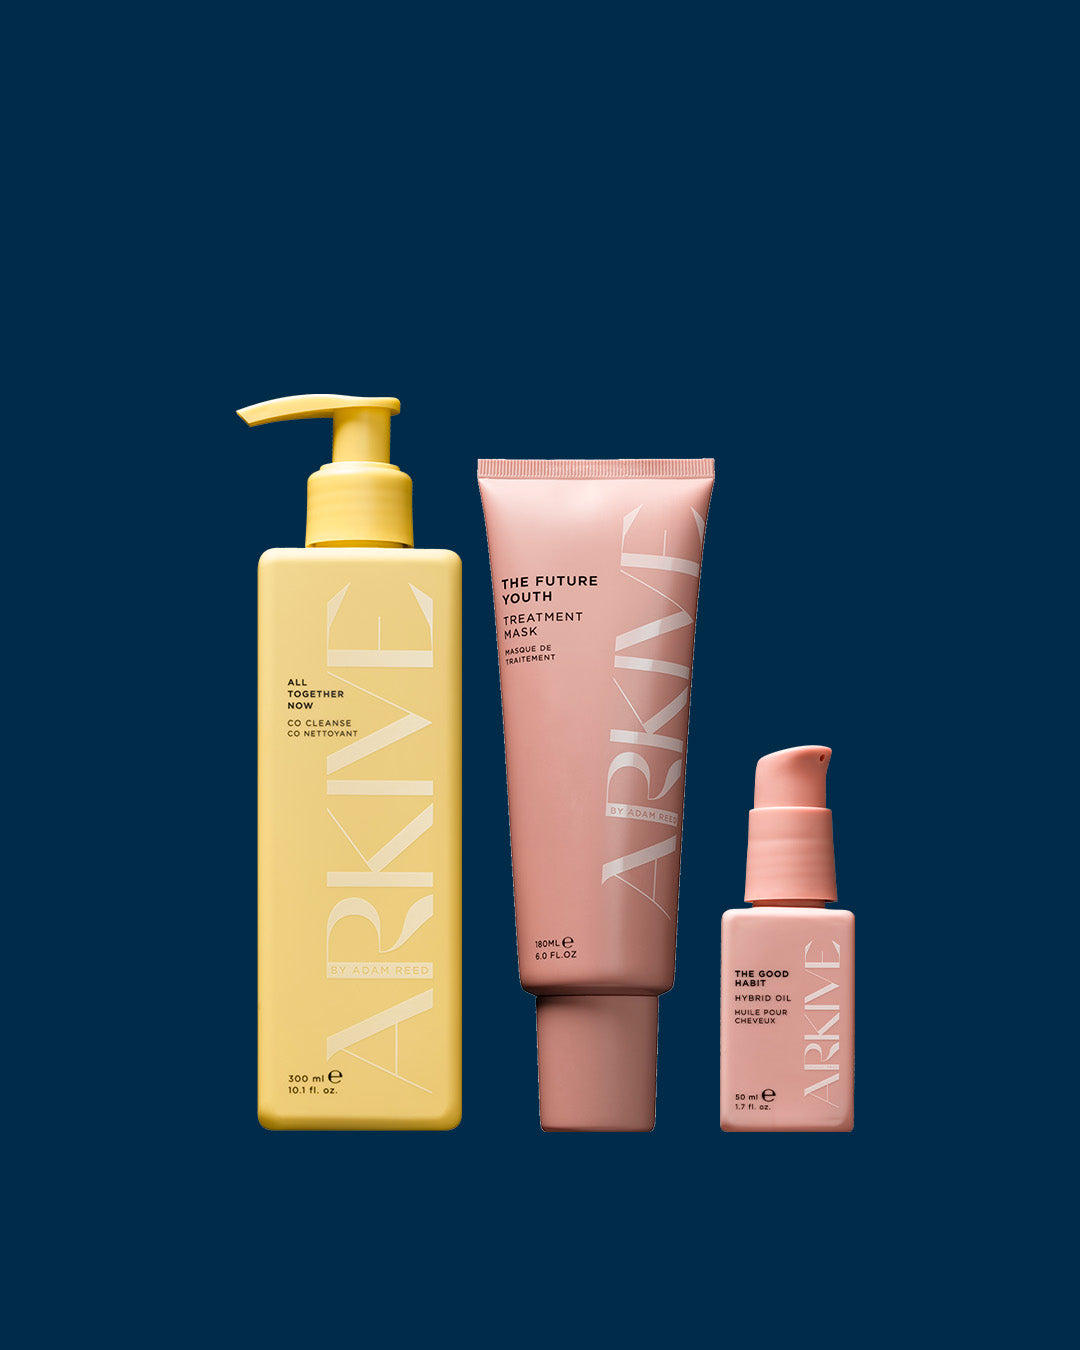 A gift set of Arkive products, including the Future Youth treatment mask, the Rootine calming scalp serum, and All Together co cleanser, laid out on a navy blue background